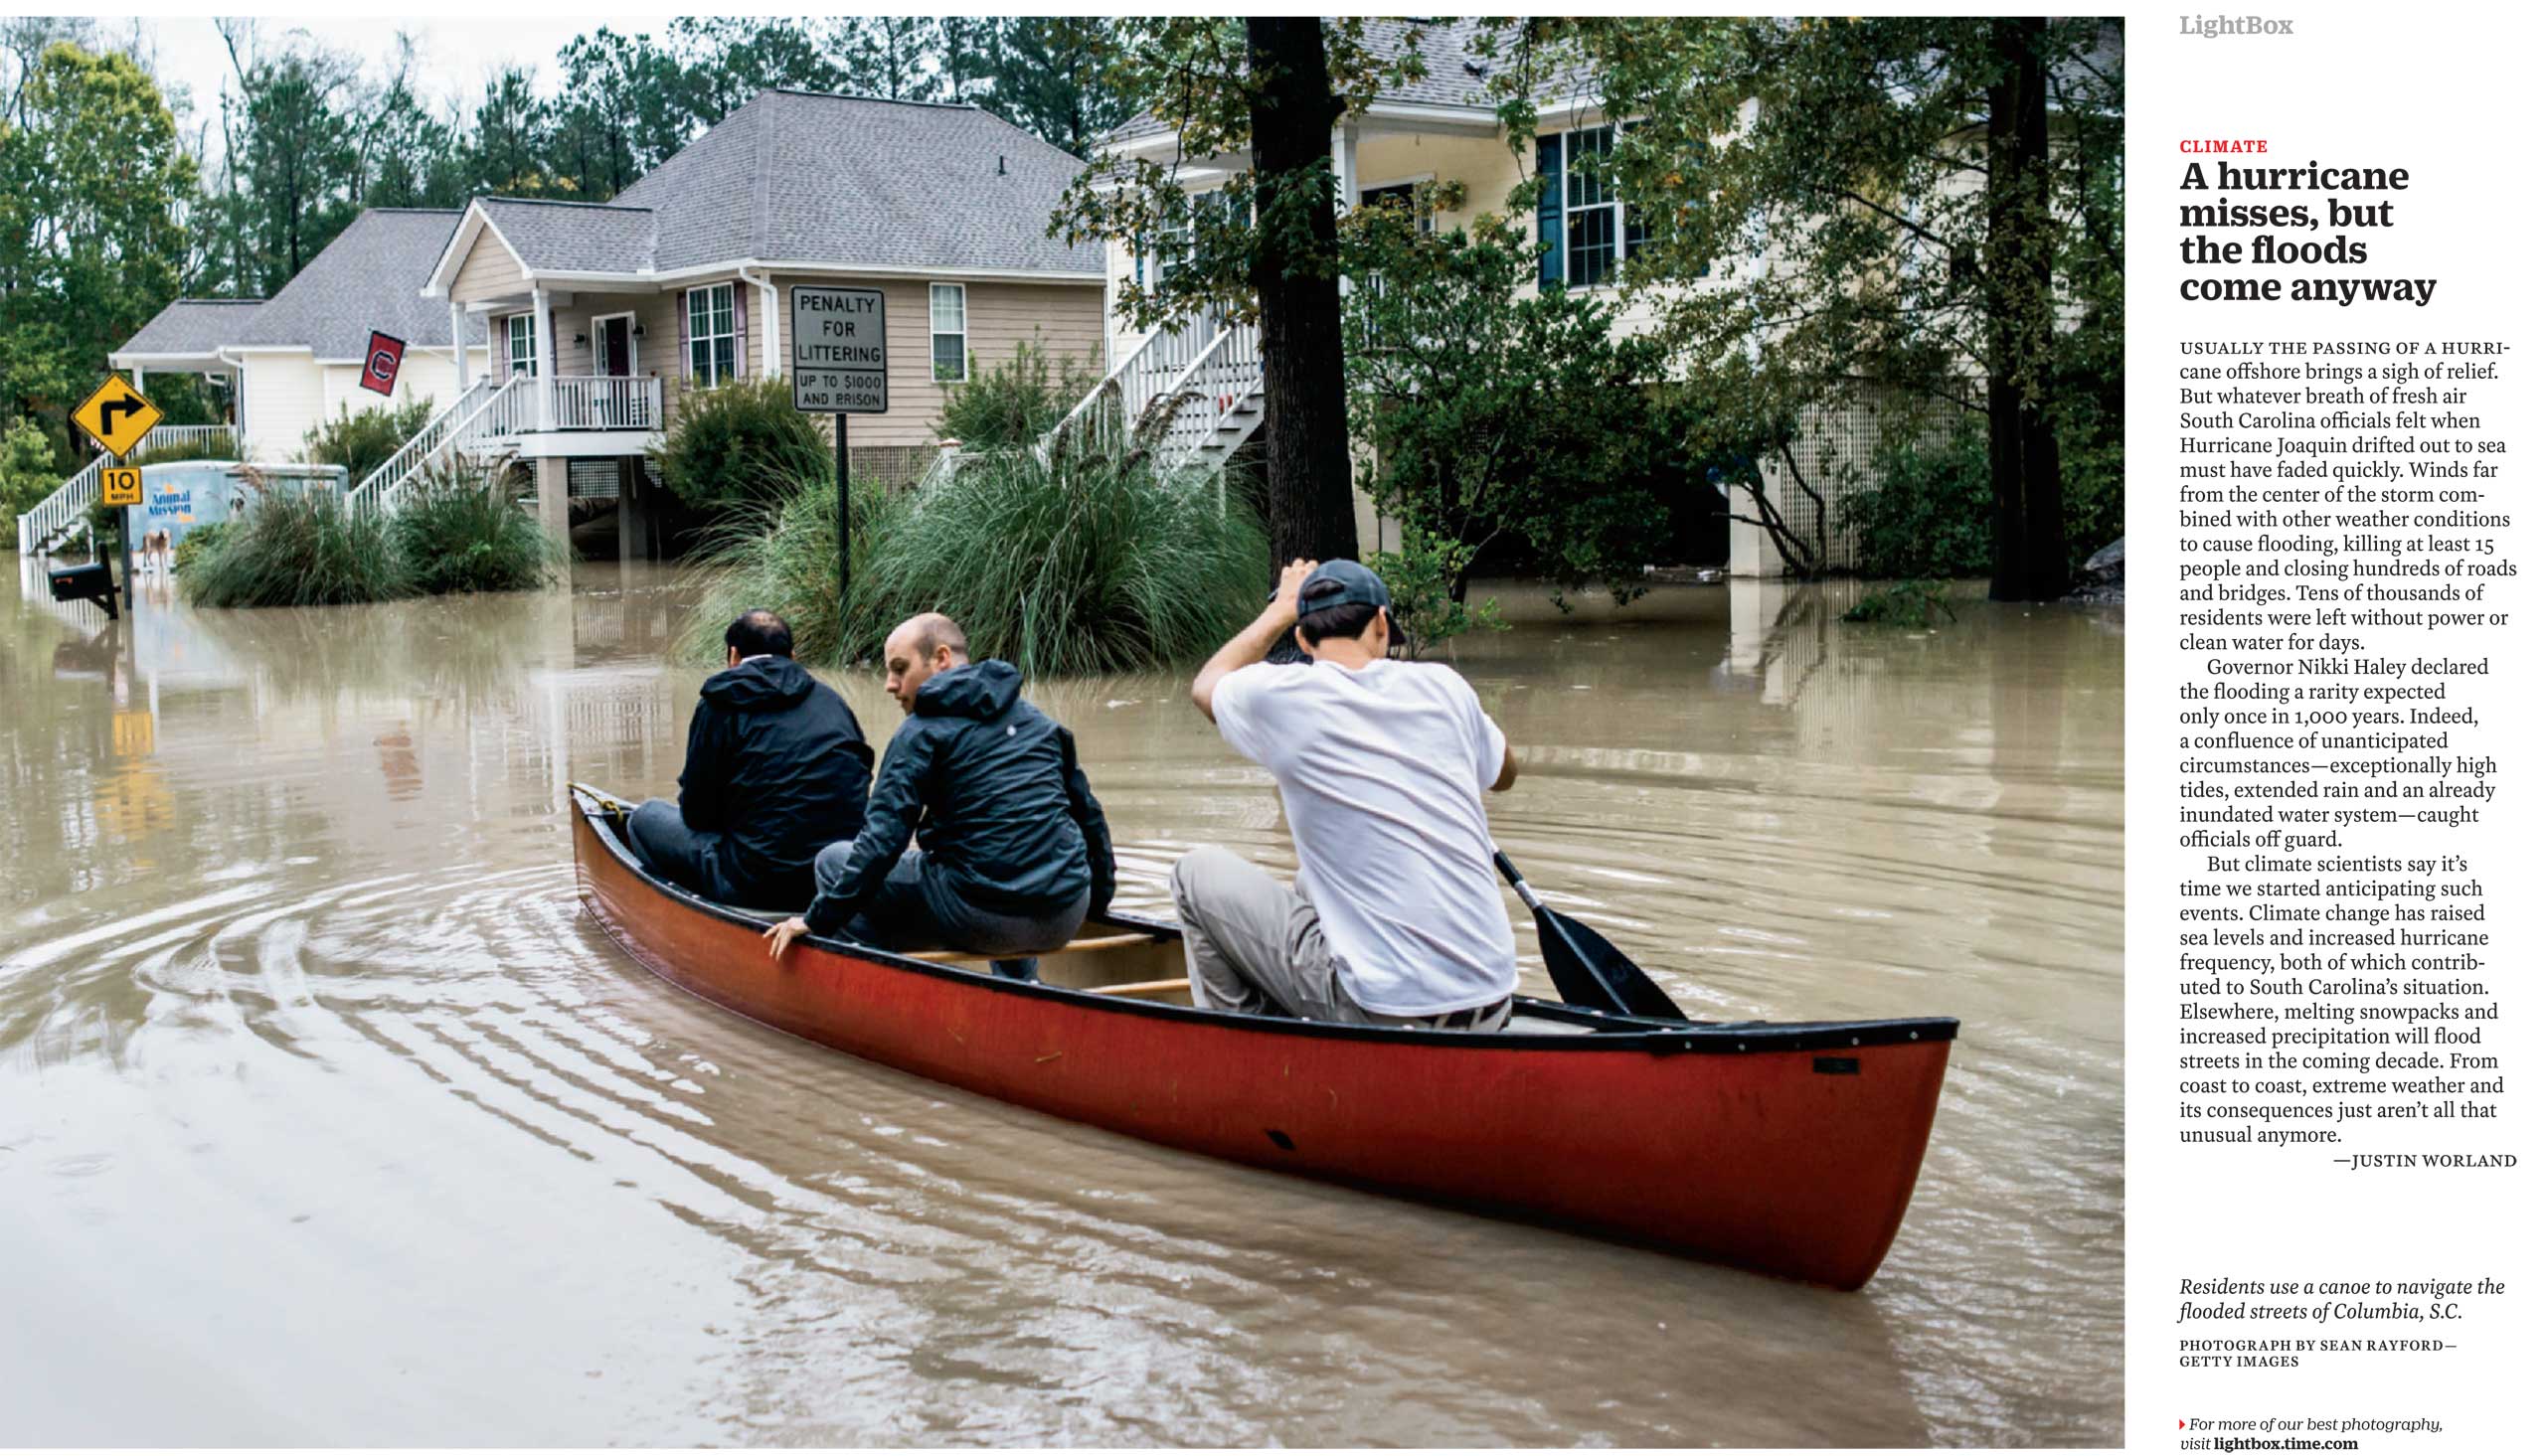 Photograph by Sean Rayford—Getty ImagesResidents use a canoe to navigate the flooded streets of Columbia, S.C.. (TIME issue October 19, 2015)